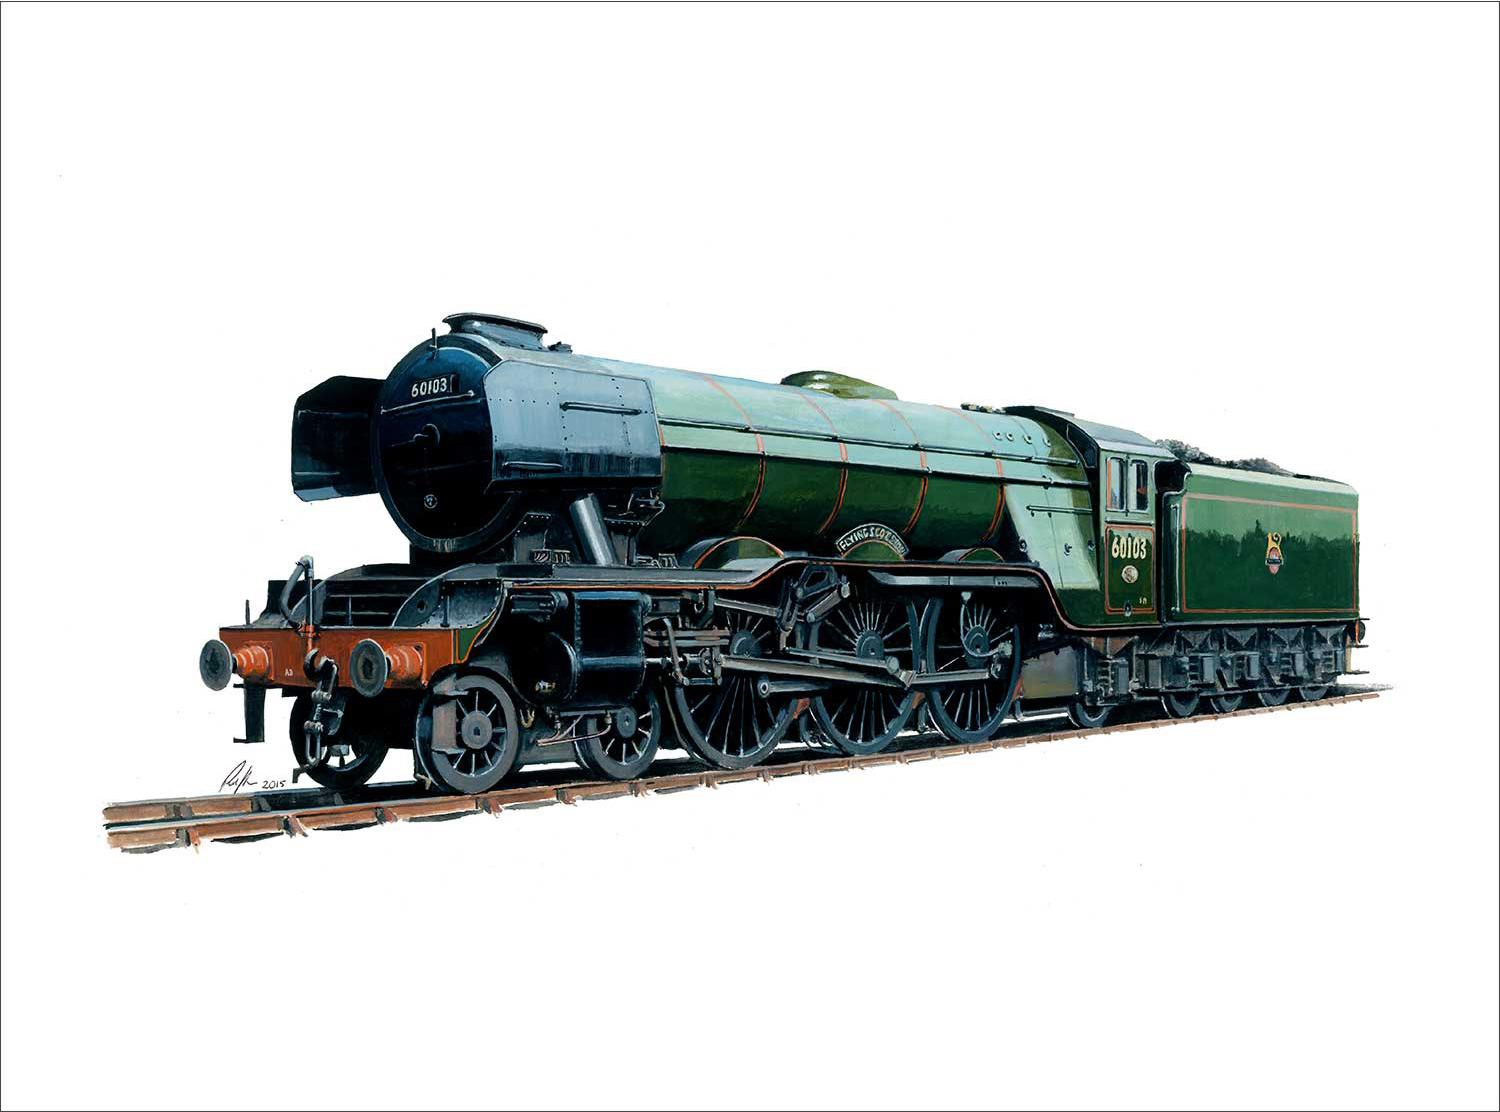 LNER A3 No 60103 Flying Scotsman. Built 1923 at Doncaster Art Print from an original painted by artist Rod Harrison